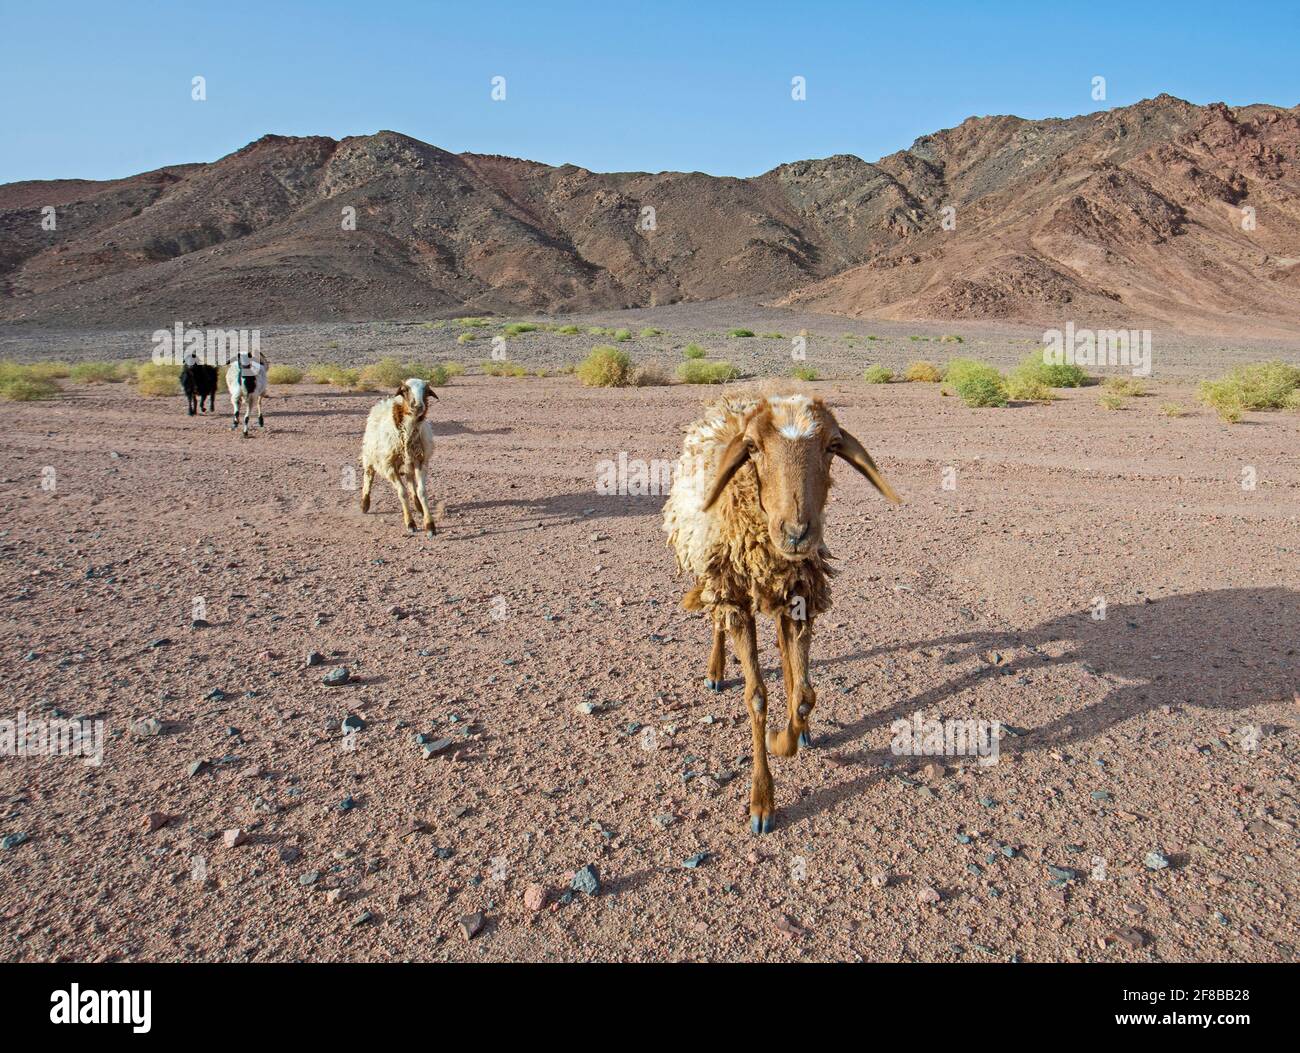 Landscape scenic view of desolate barren eastern desert in Egypt with herd of sheep and mountains Stock Photo